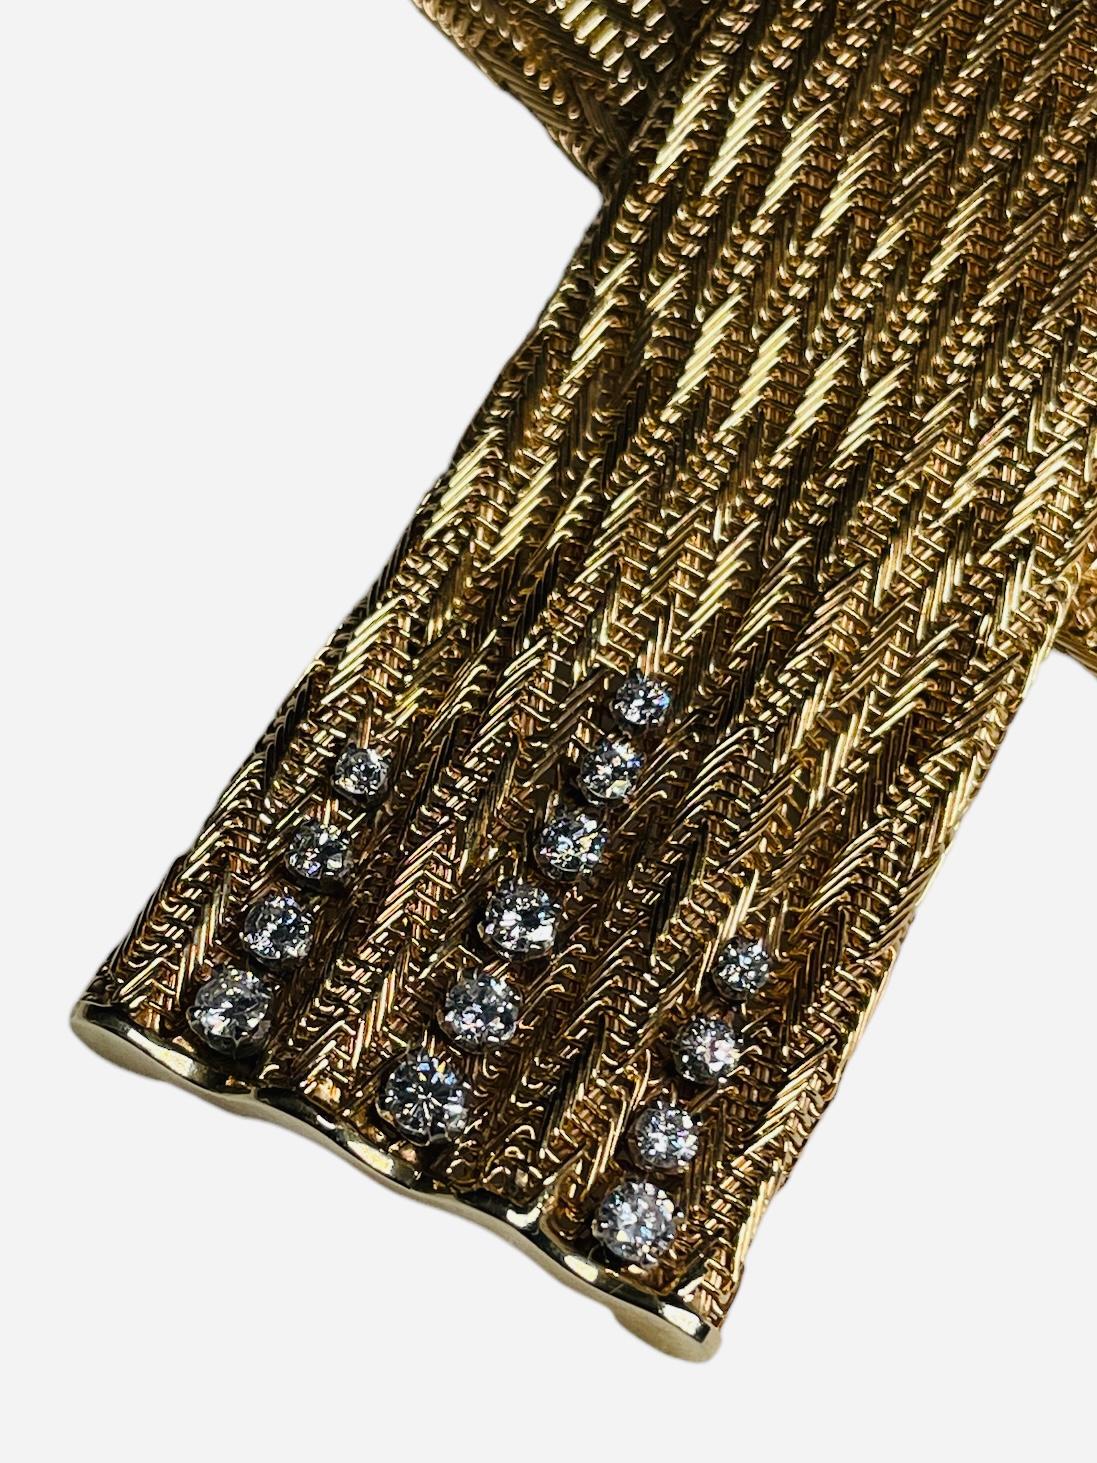 18K Gold Diamonds French Scarf Like Necklace  For Sale 3